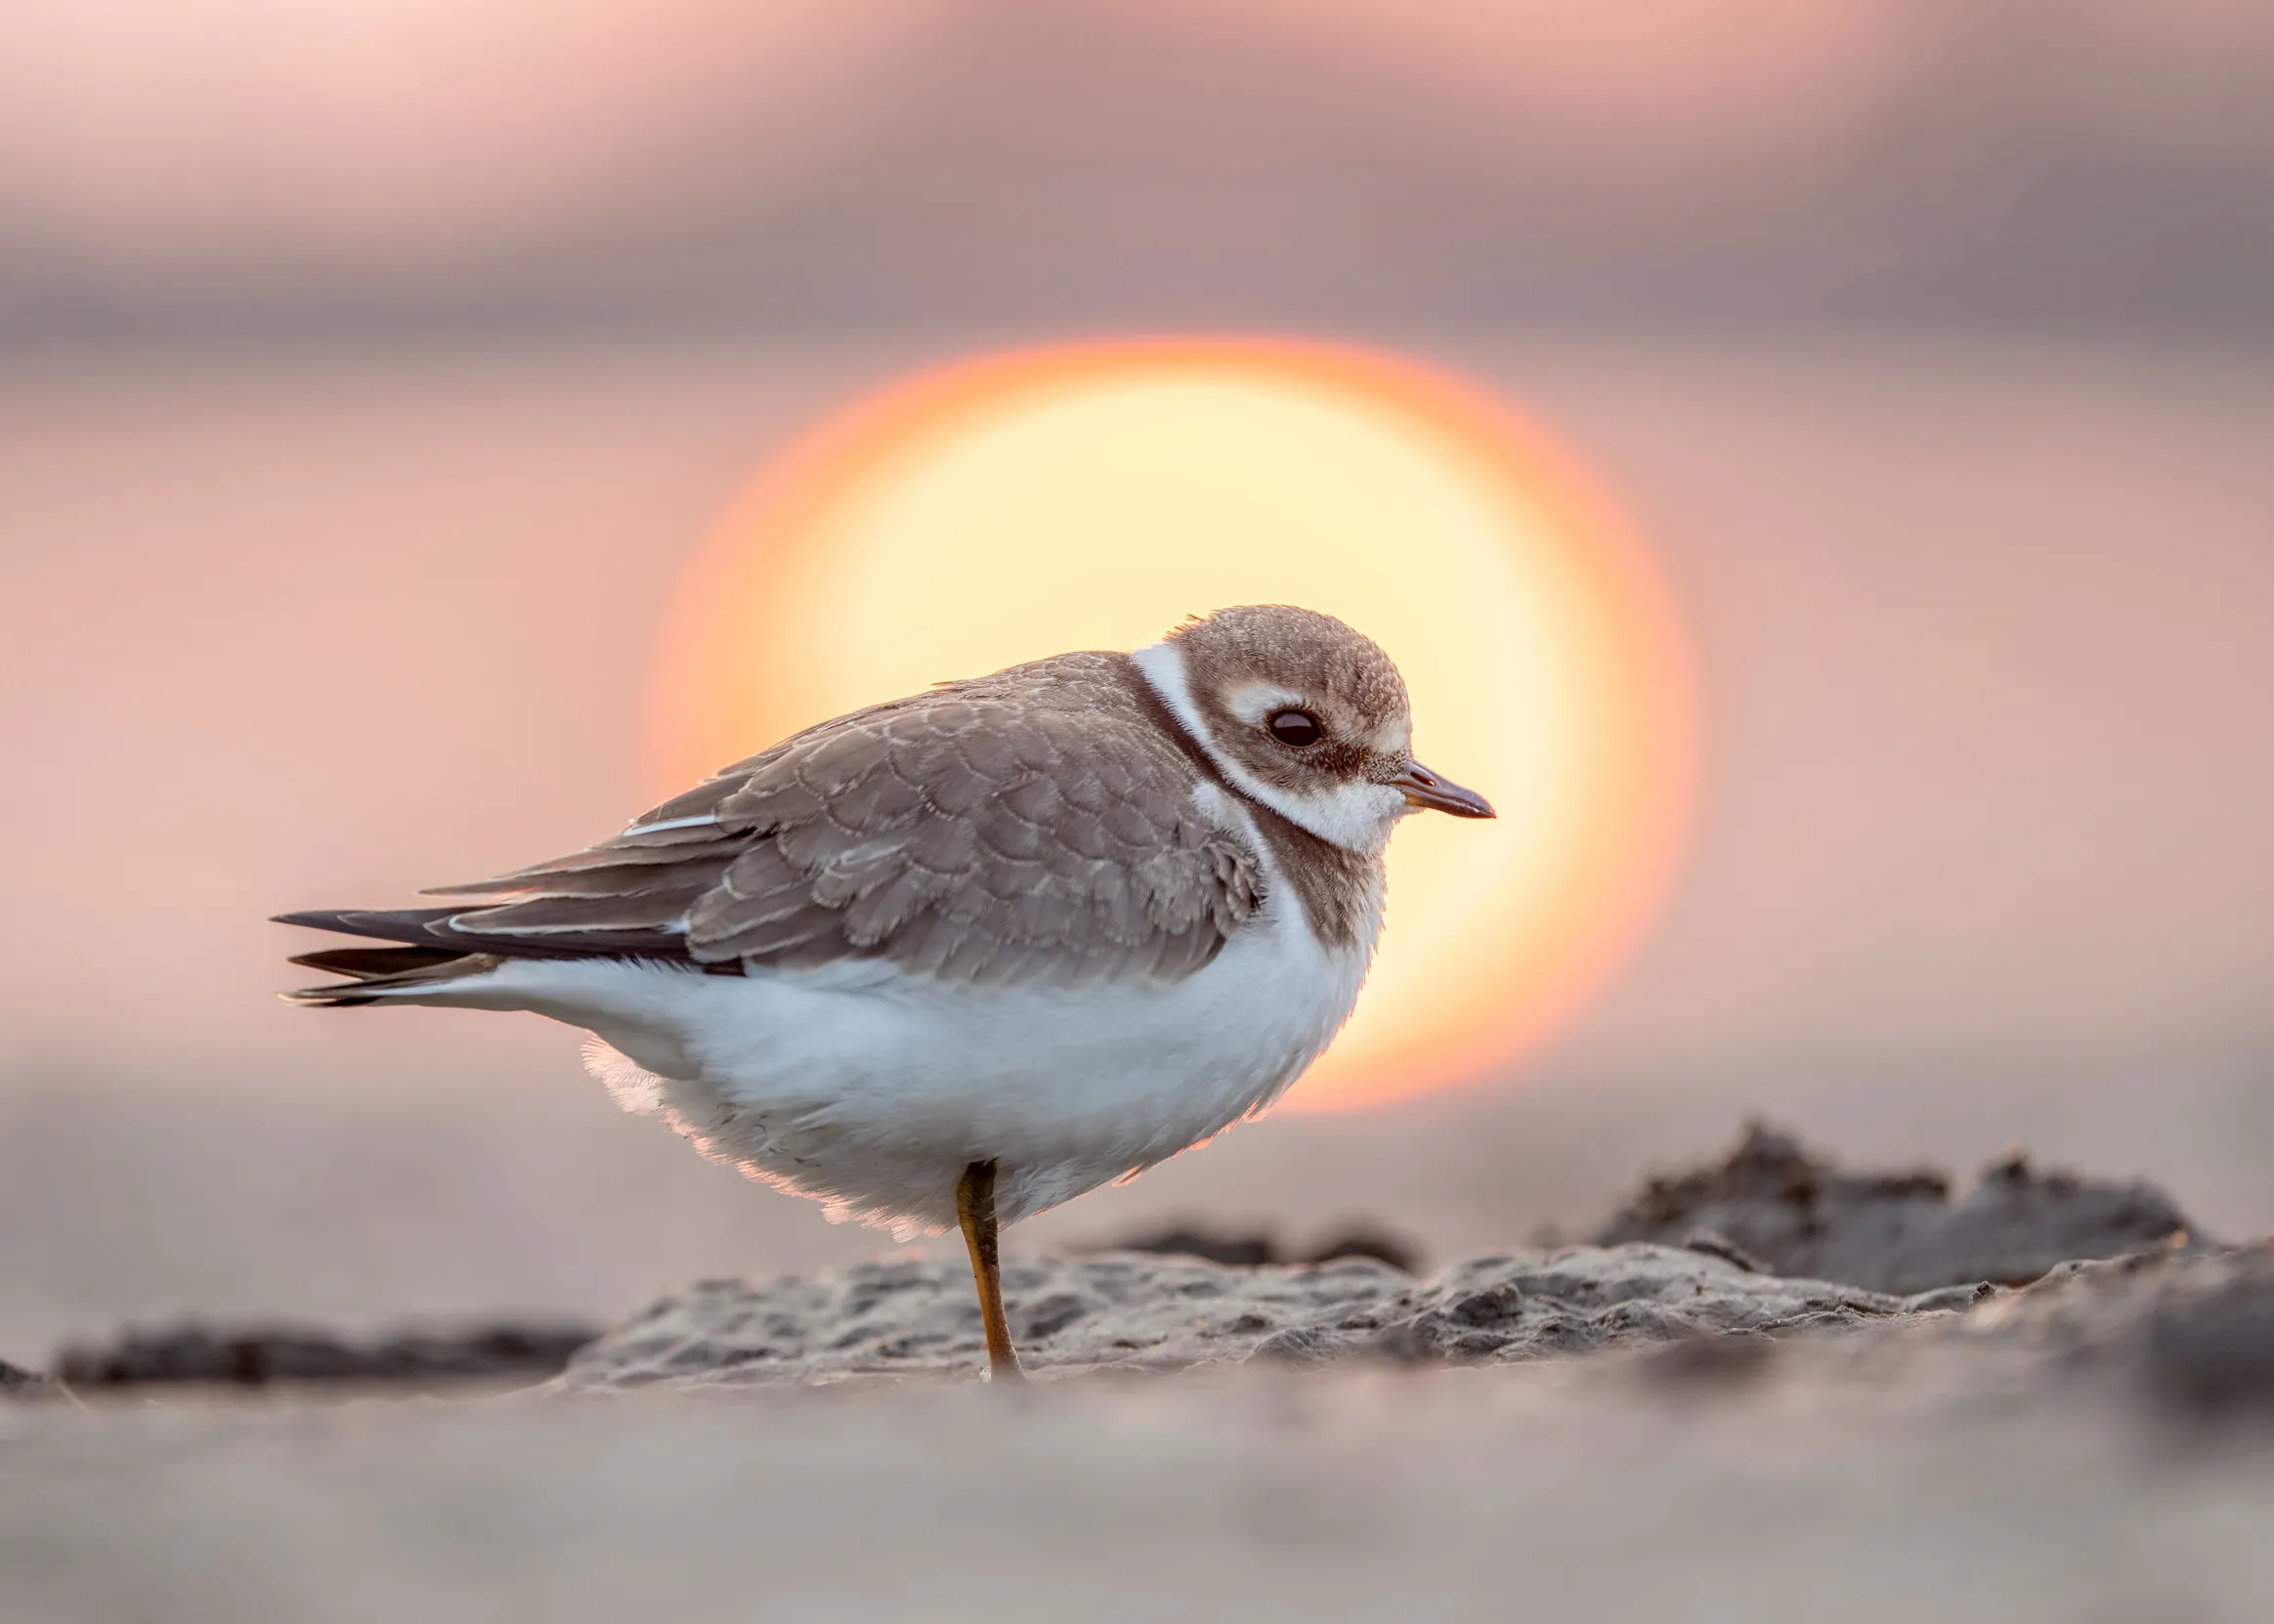 Lone Ringed Plover stood on sand, with the sun setting behind